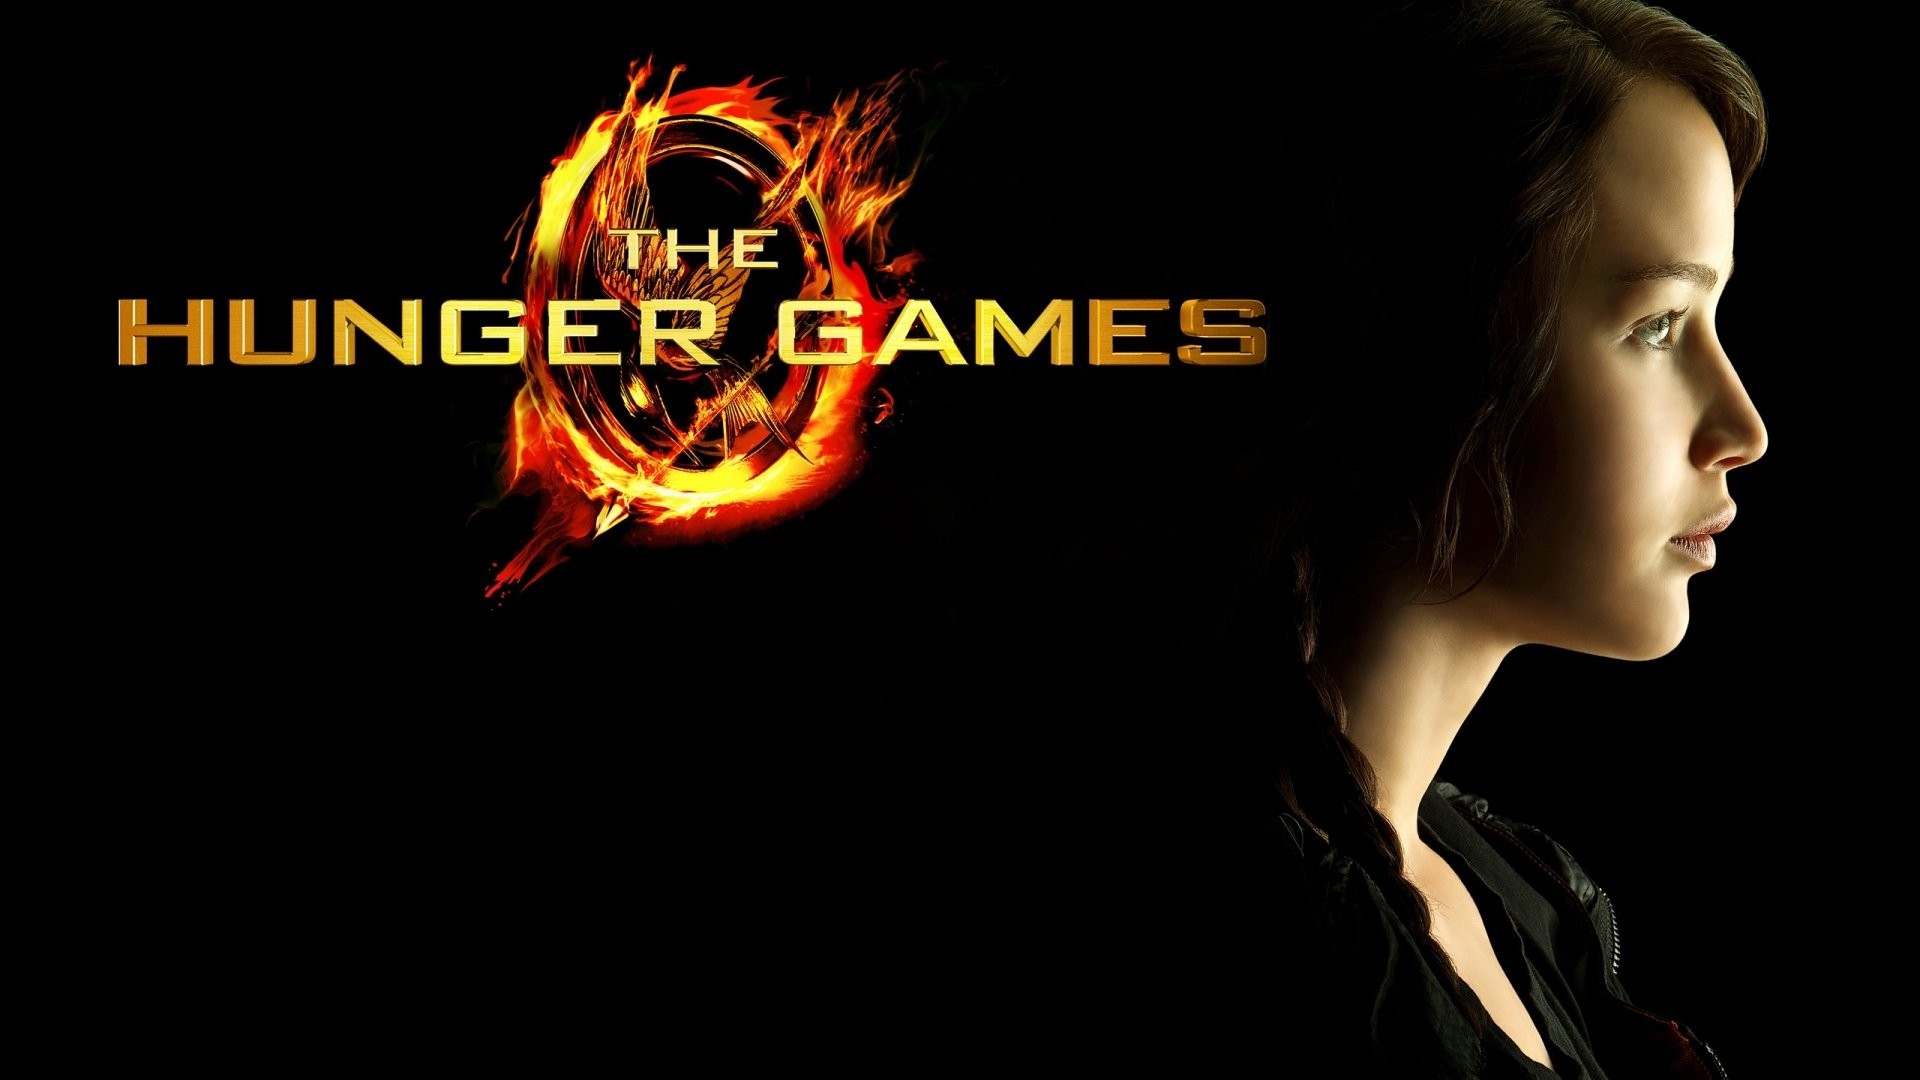 the hunger games wallpaper massive deal Save 82  wwwhumumssedubo